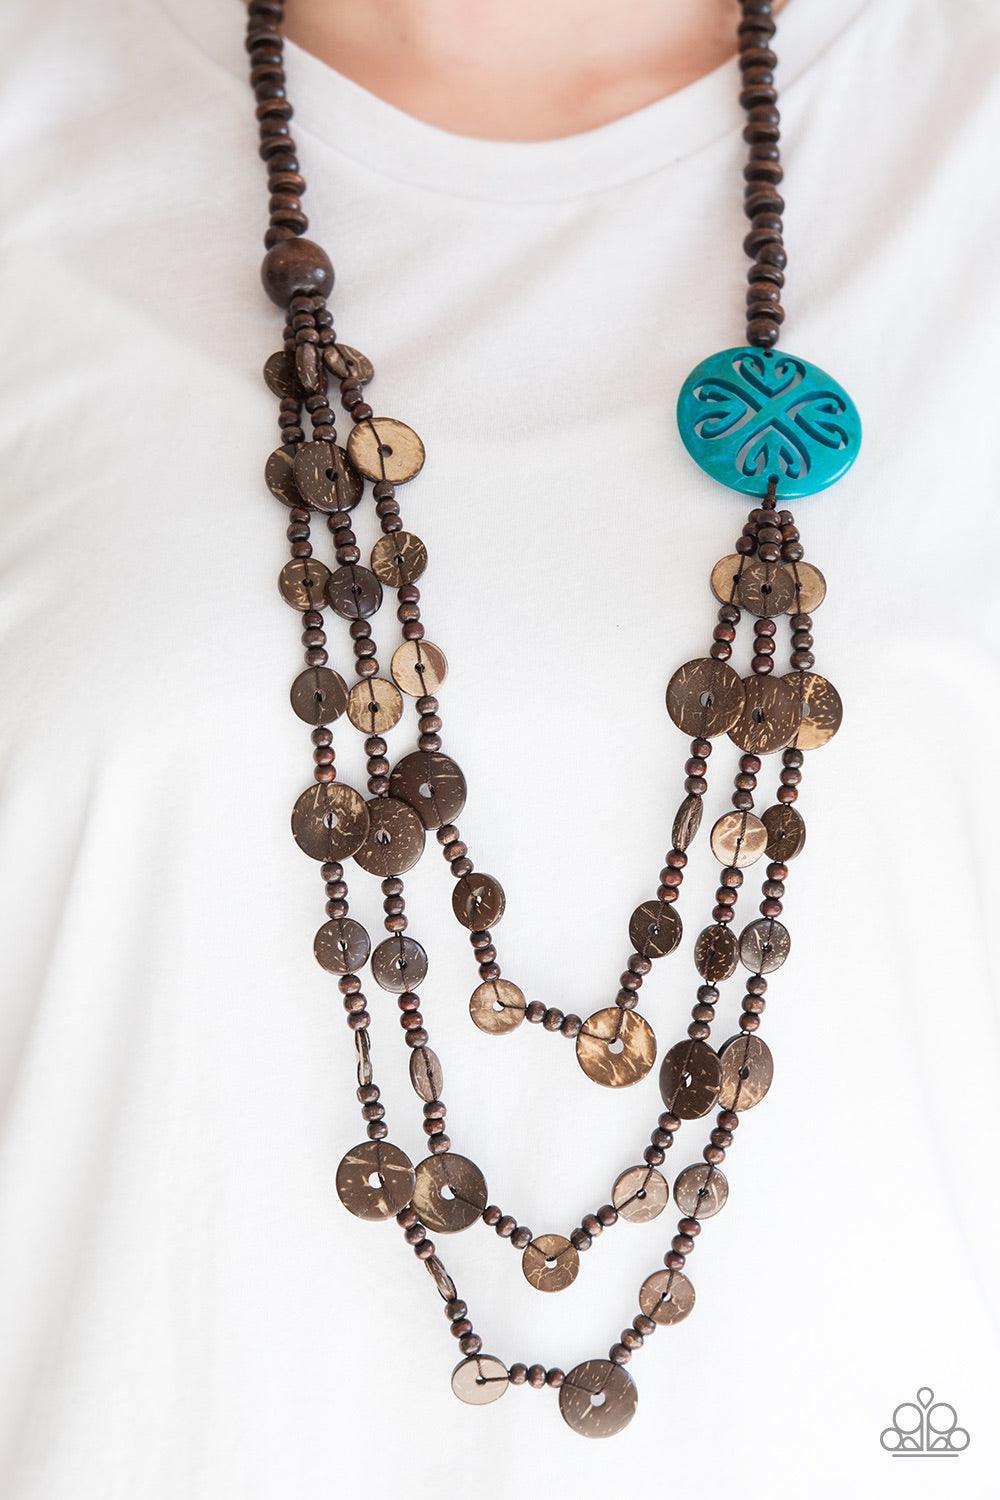 Paparazzi Accessories Jungle Jive - Blue Mismatched brown wooden beads are threaded along a shiny brown string, creating summery layers across the chest. Featuring a whimsical floral pattern, a dramatic blue wooden bead adorns one side for a seasonal fini